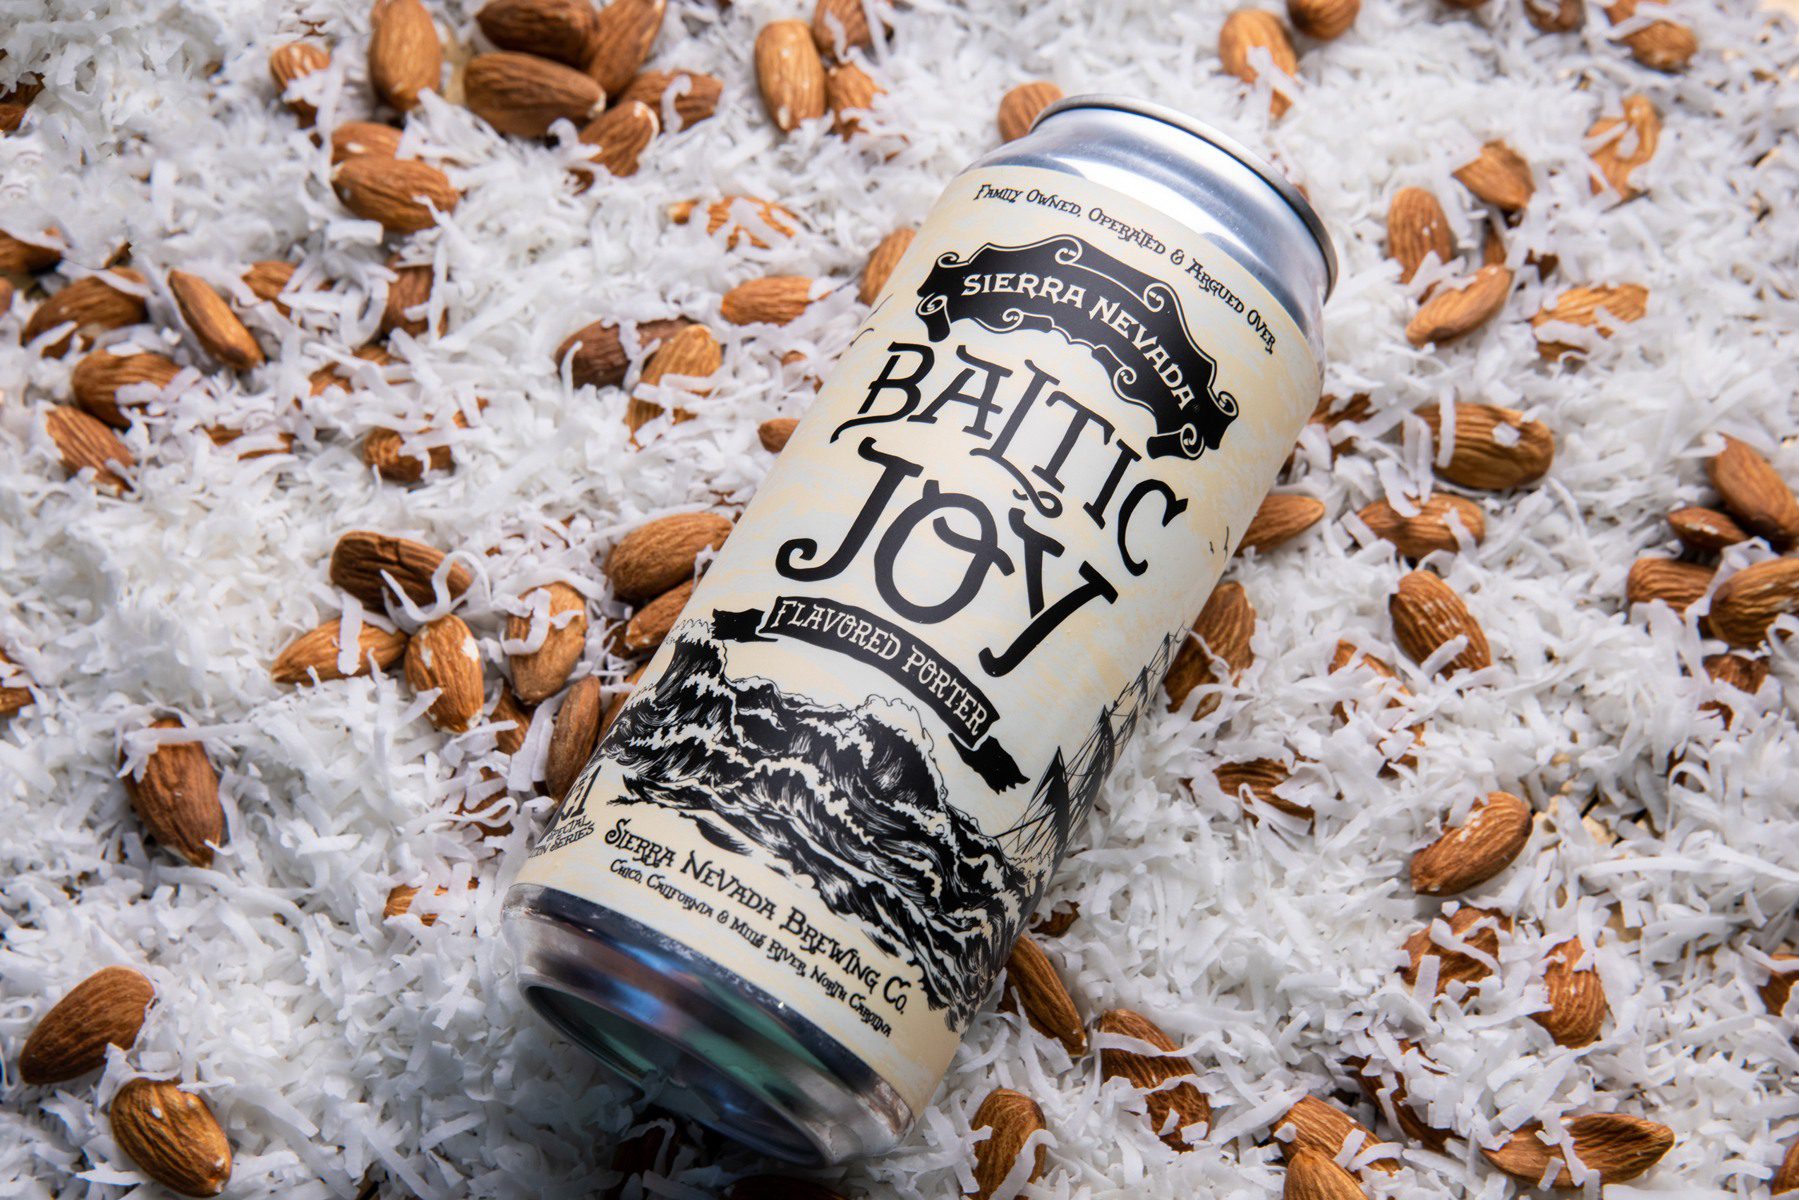 A can of Baltic Joy Porter resting on a bed of almonds and coconut